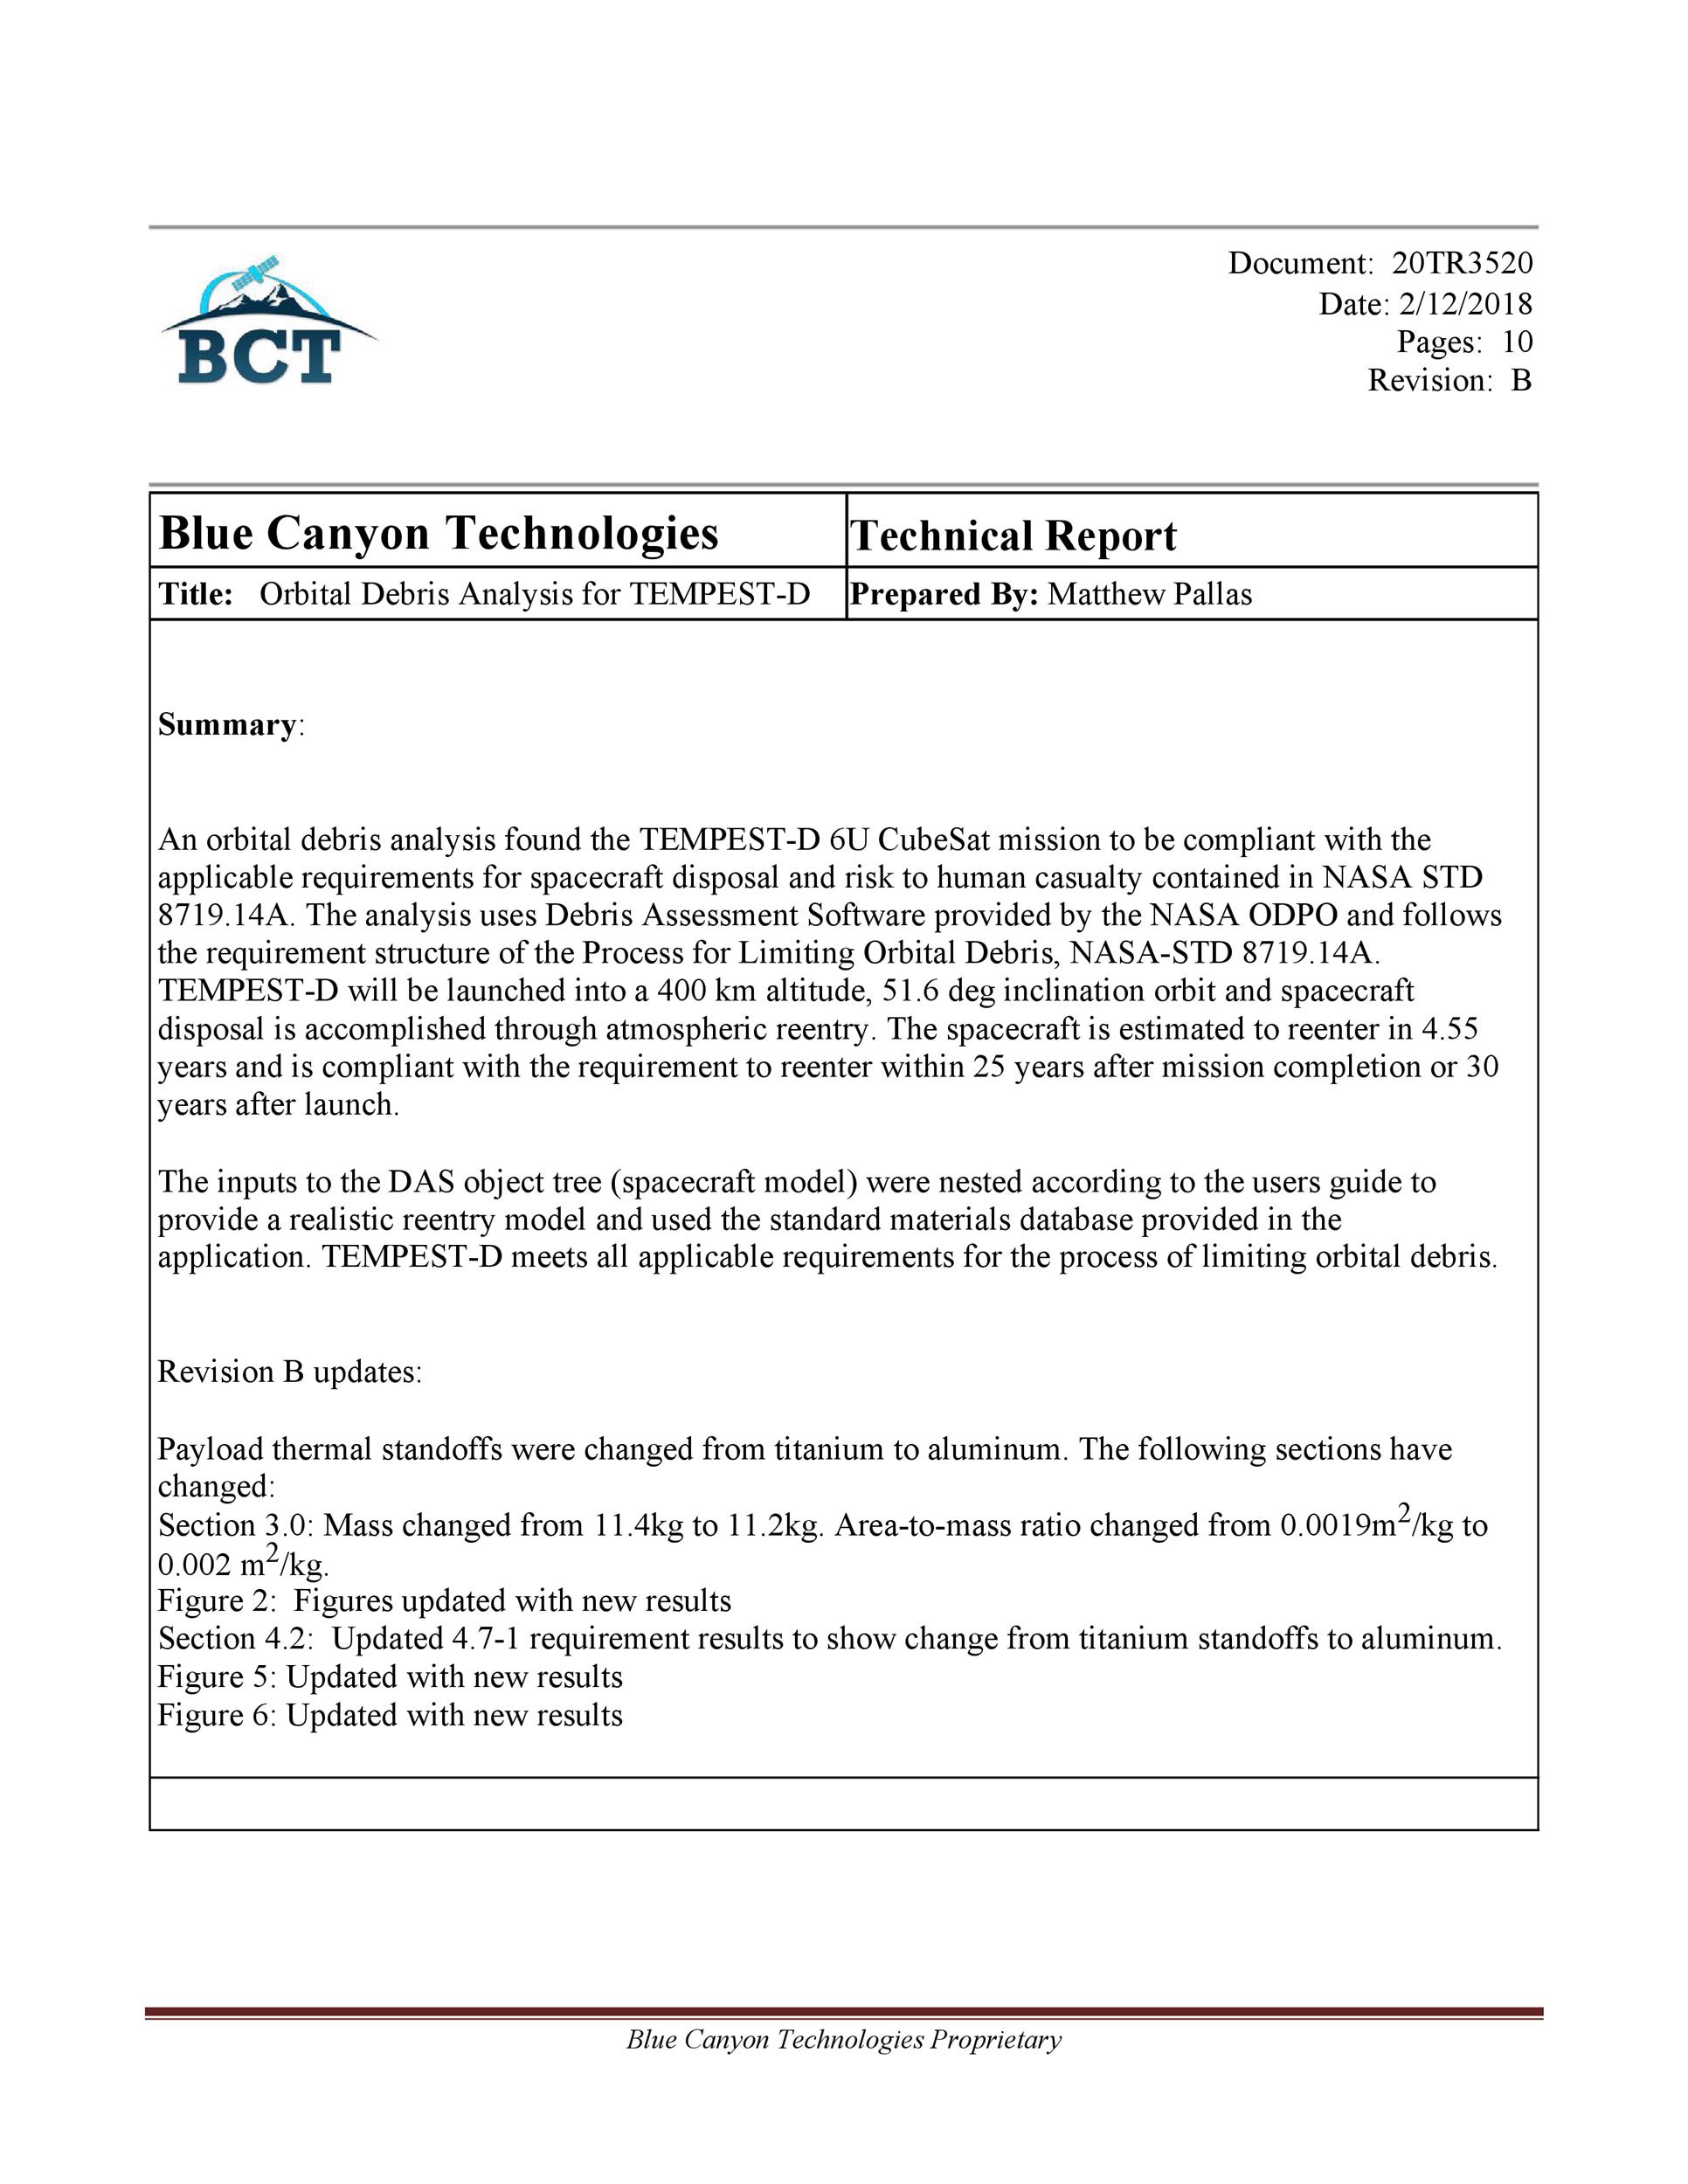 technical report writing referencing